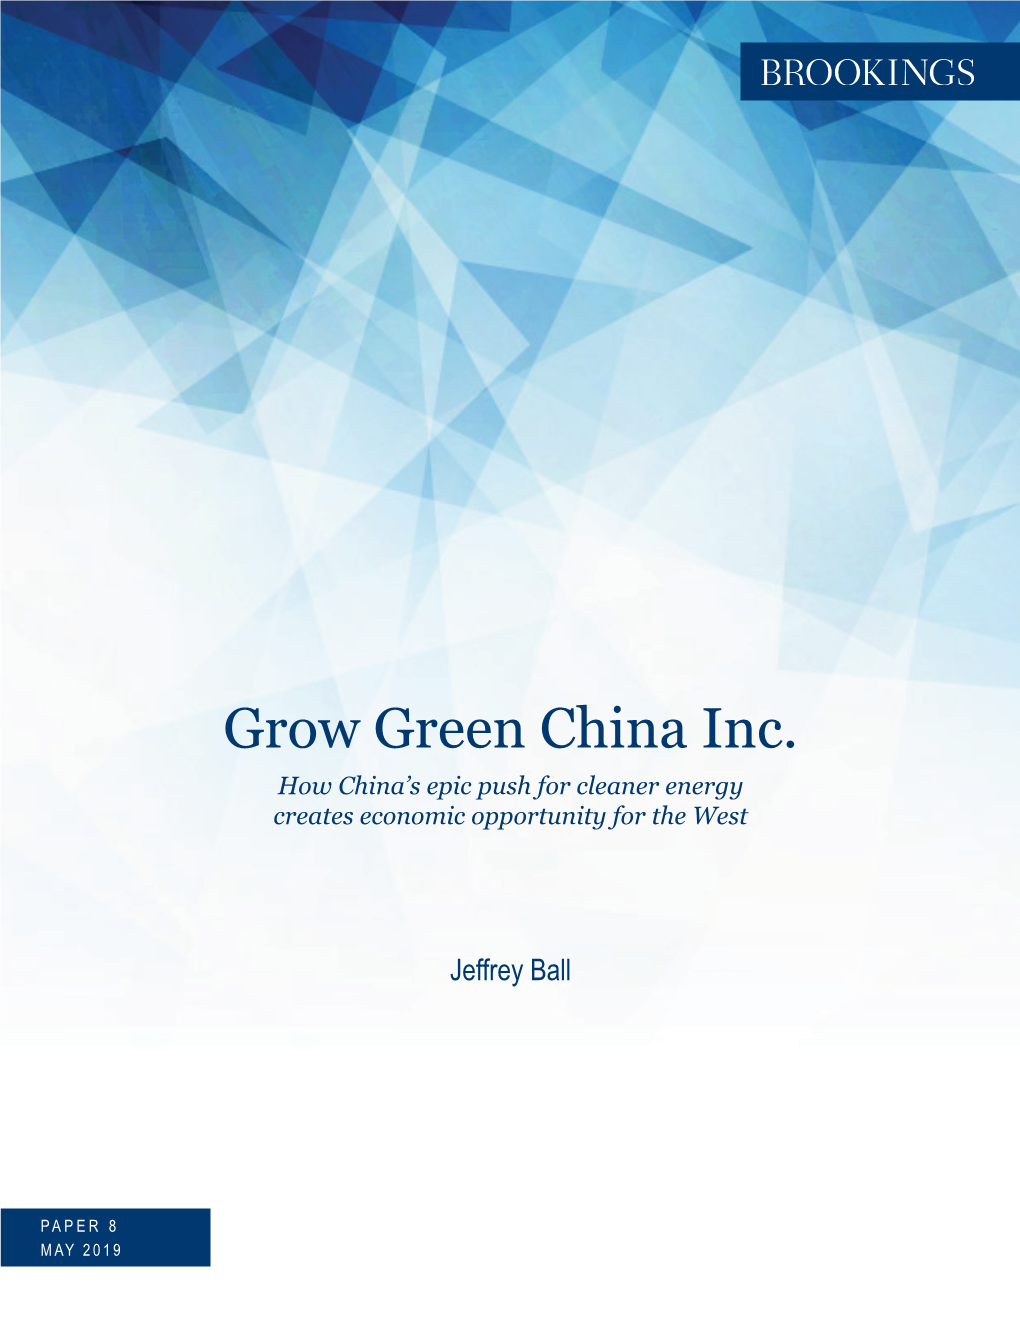 Grow Green China Inc. How China’S Epic Push for Cleaner Energy Creates Economic Opportunity for the West